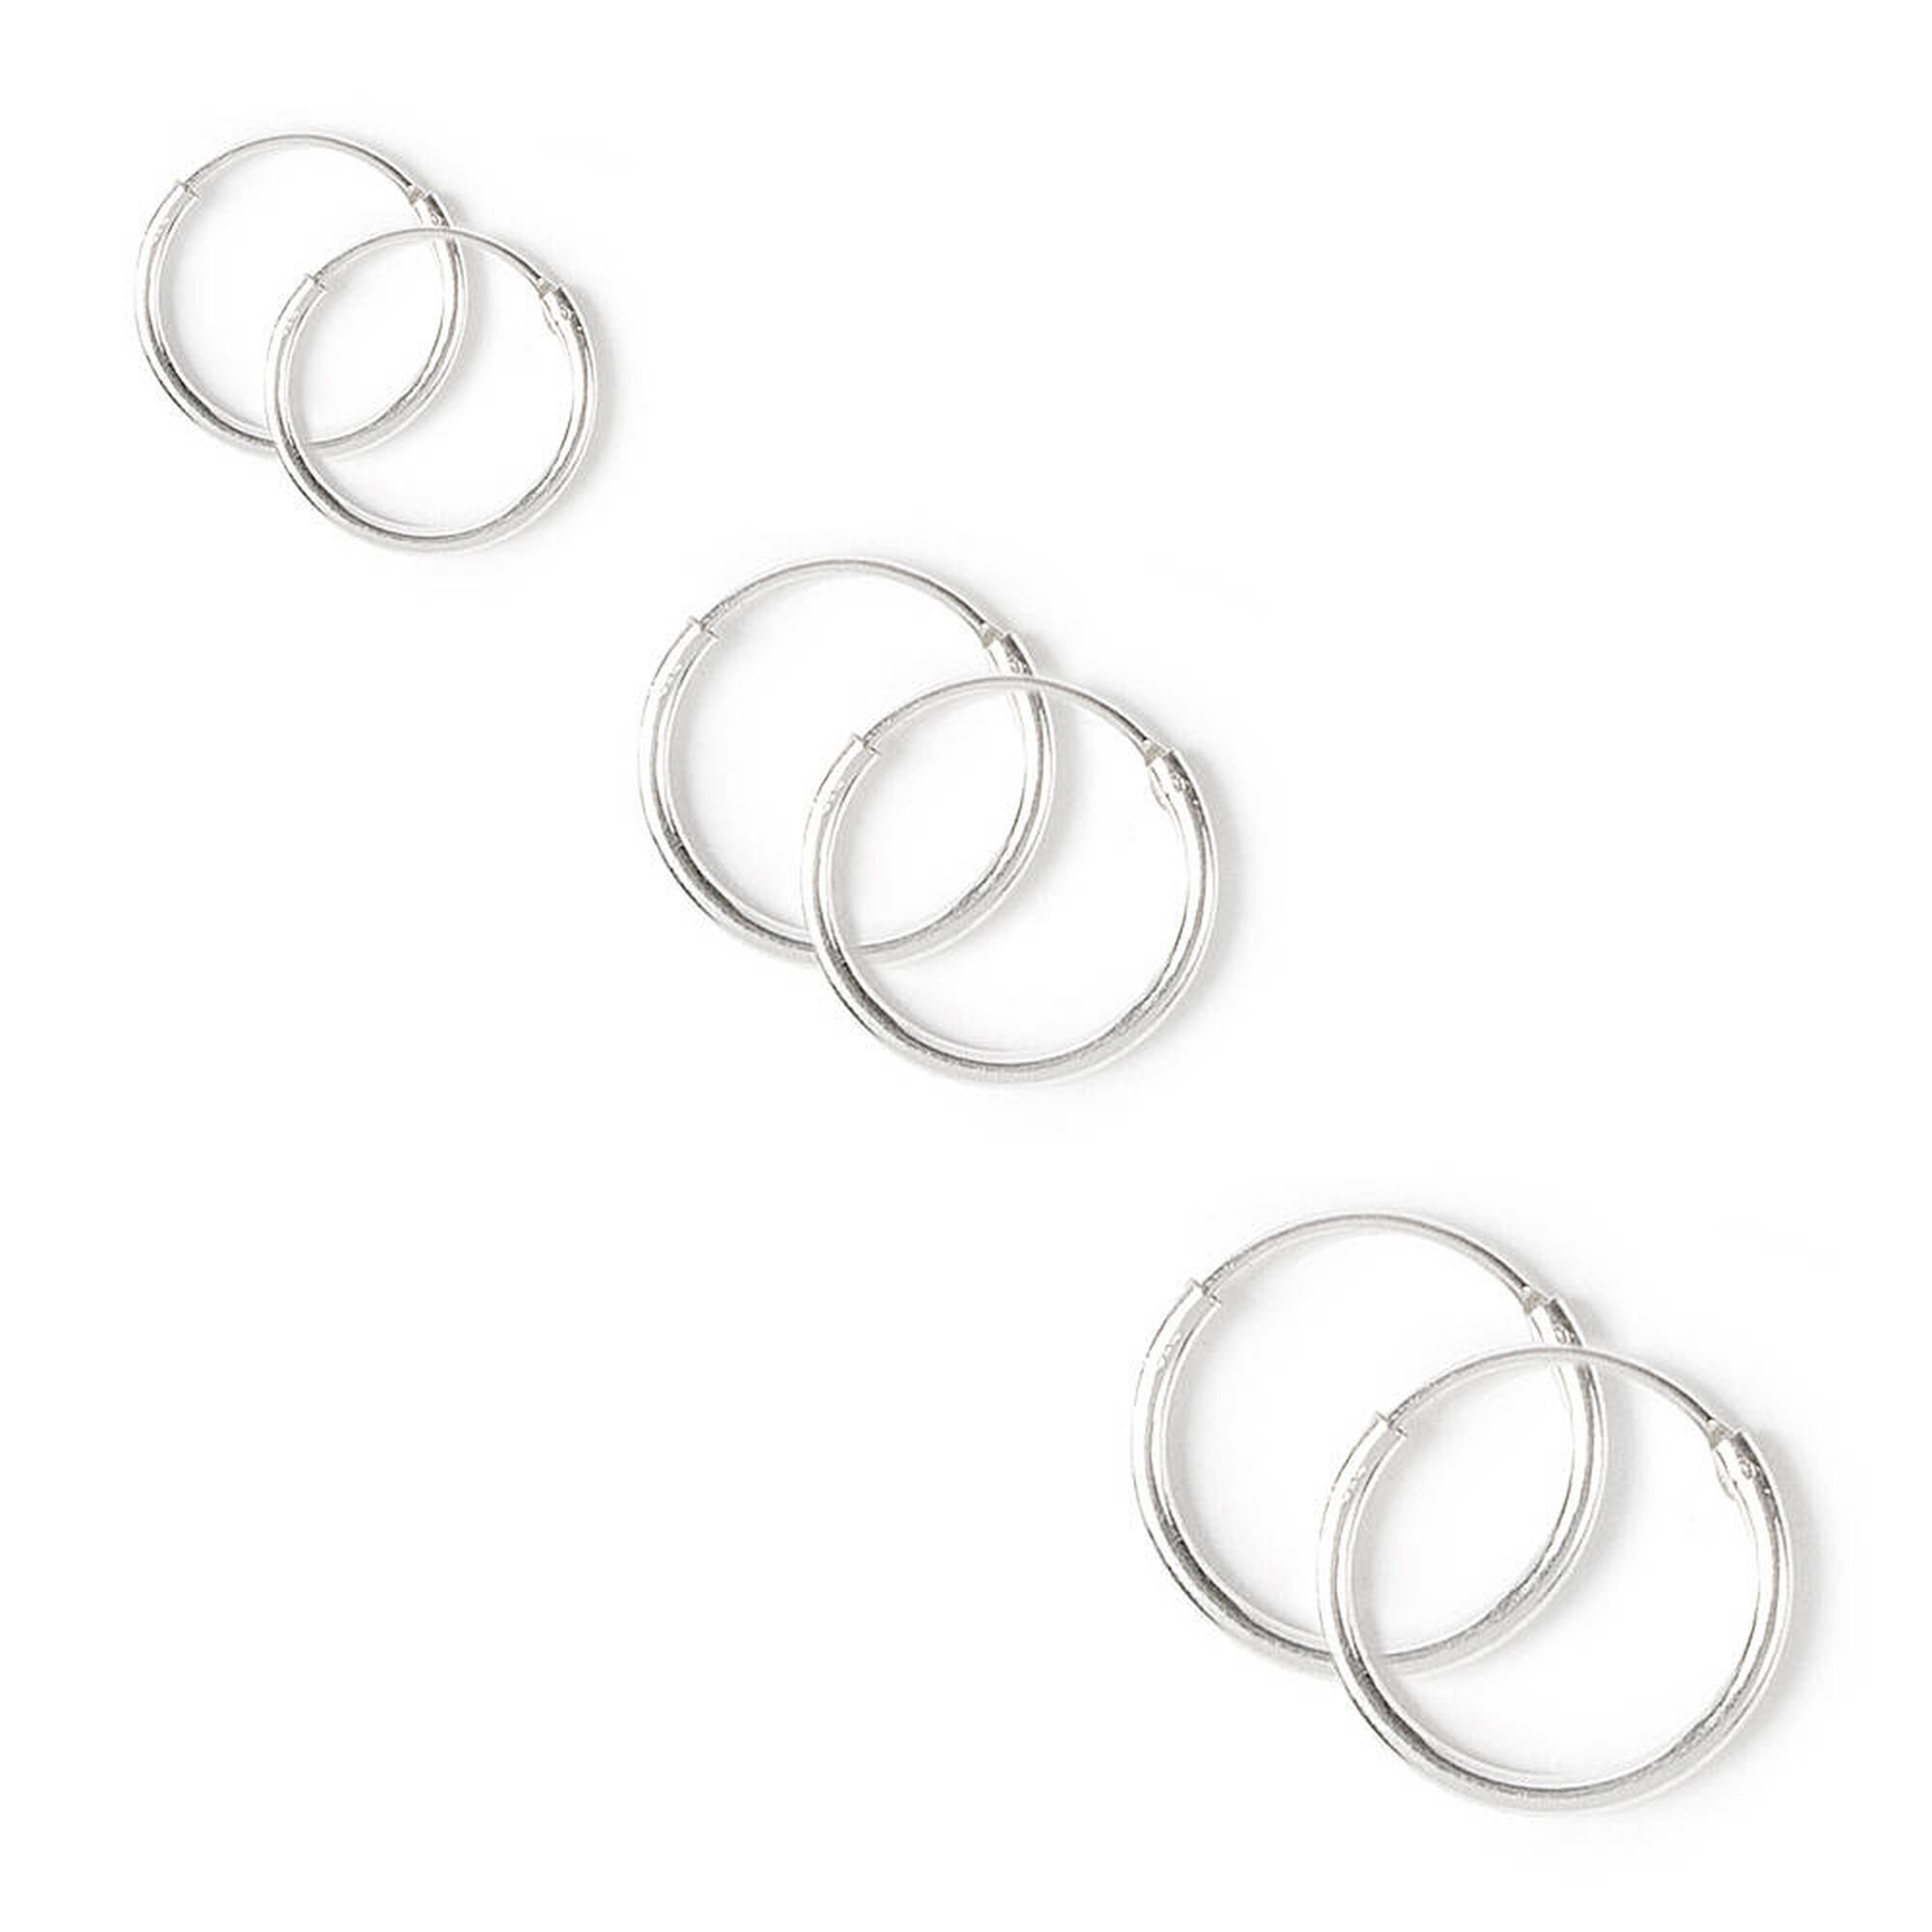 View Claires Graduated Hoop Earrings 3 Pack Silver information